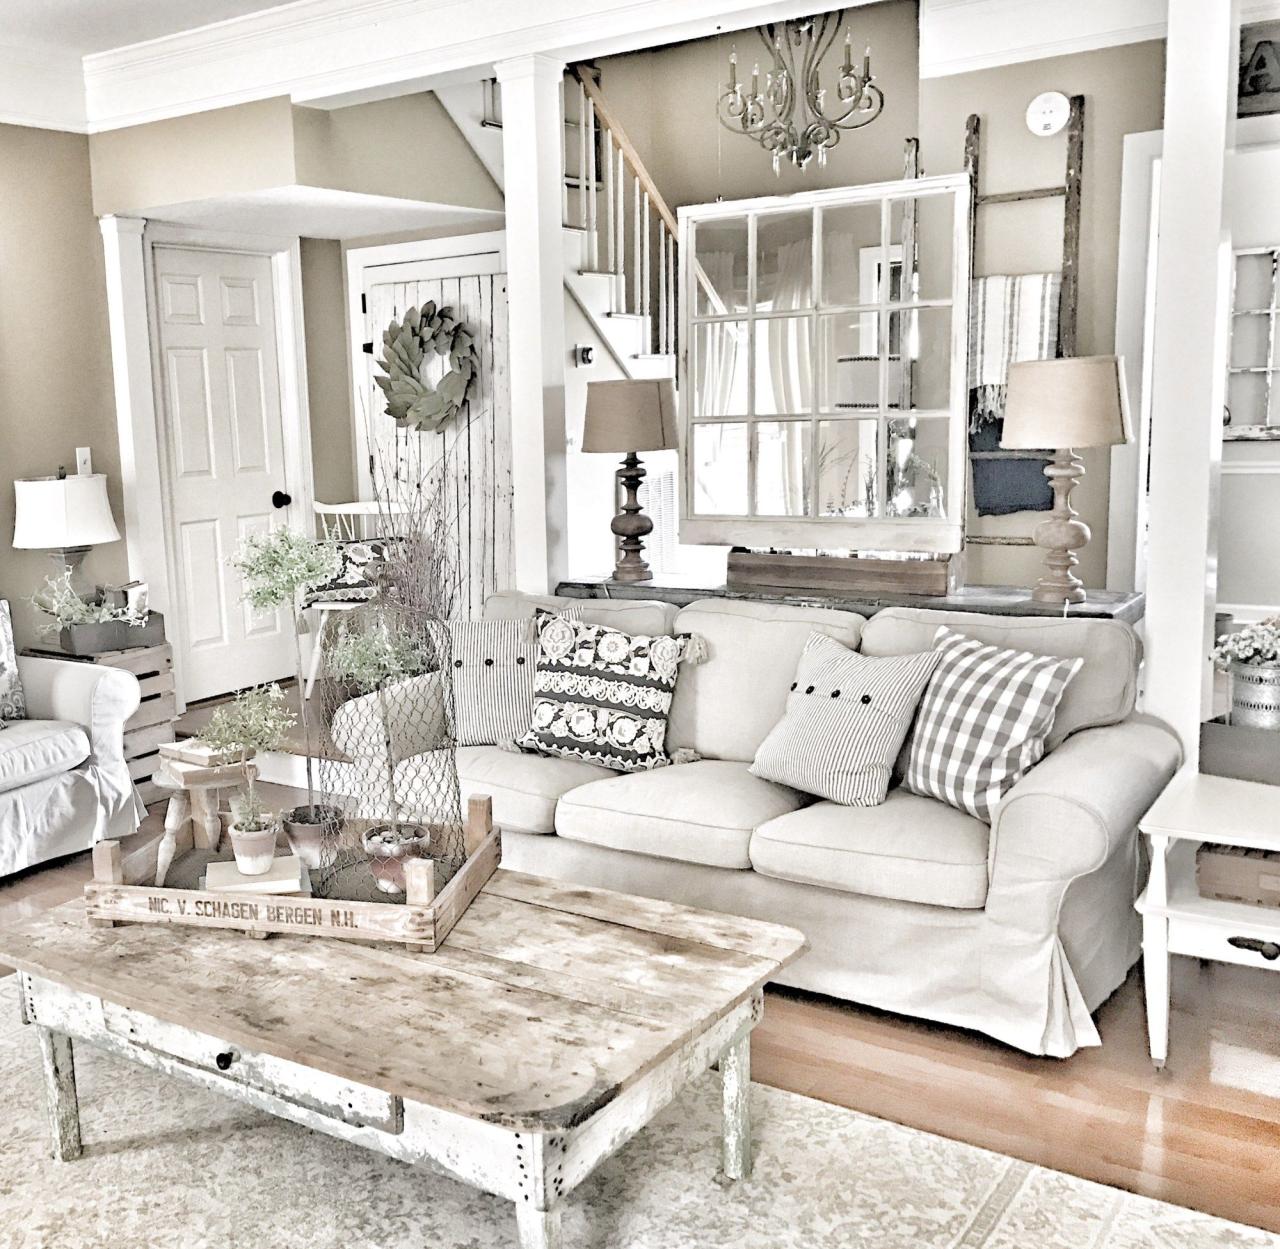 Room rustic living chic cozy decor details neutral country furniture decorating great color forestry elegance simple looks